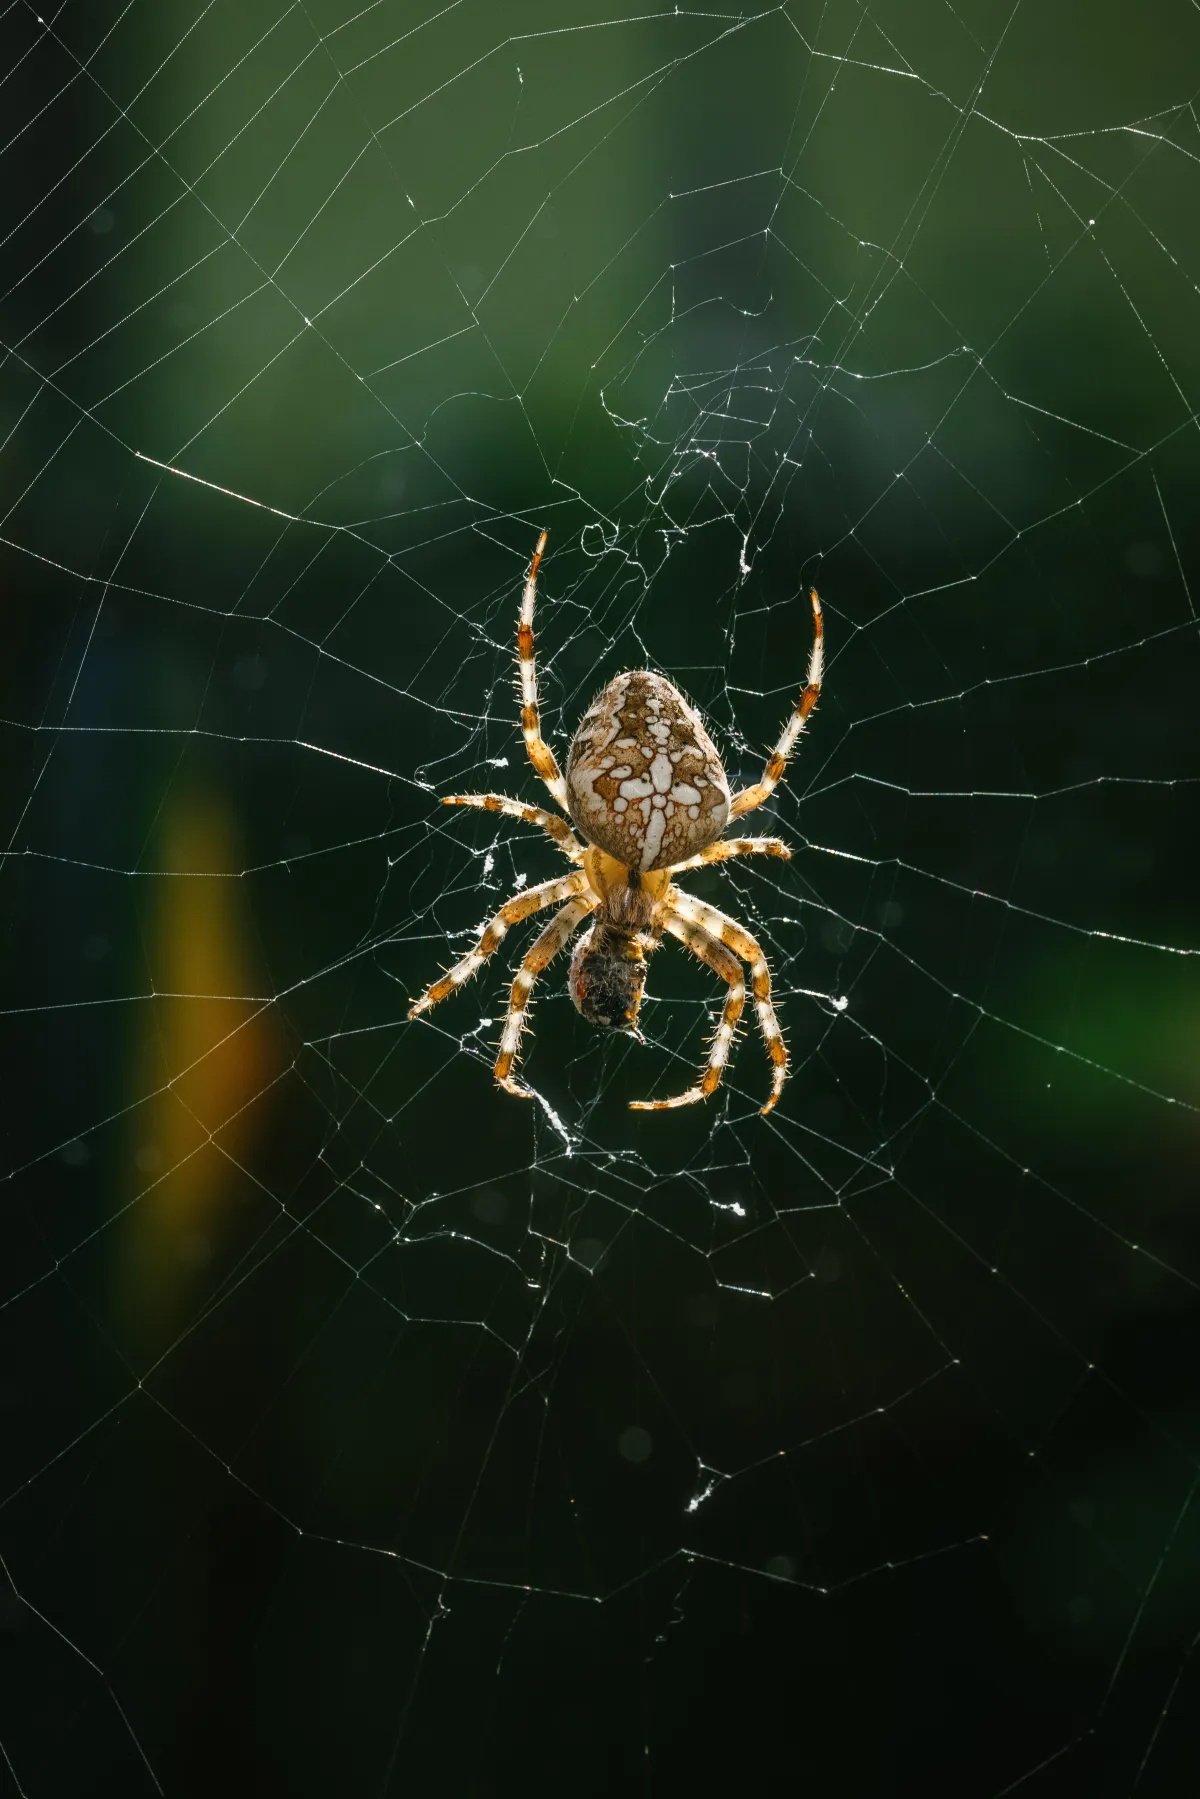 a close up photograph of a victoria spider crawling on a web